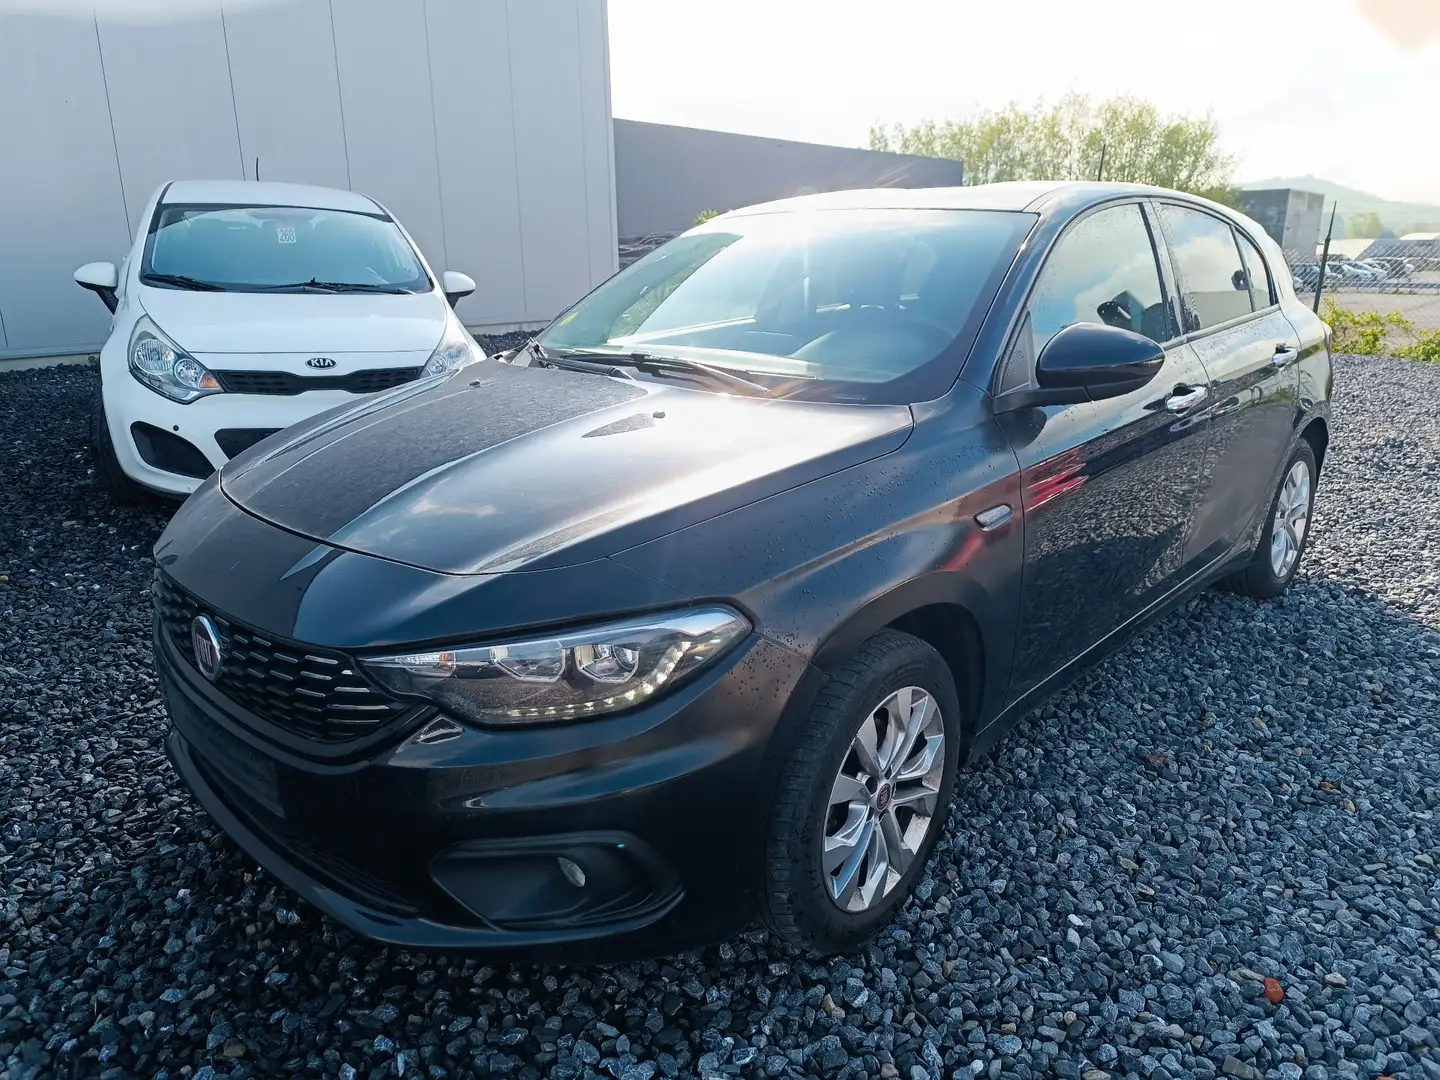 Fiat Tipo 1.6 MULTIJET 115 /AUTOMATIQUE/ MARCHAND OU EXPORT Siyah - 1